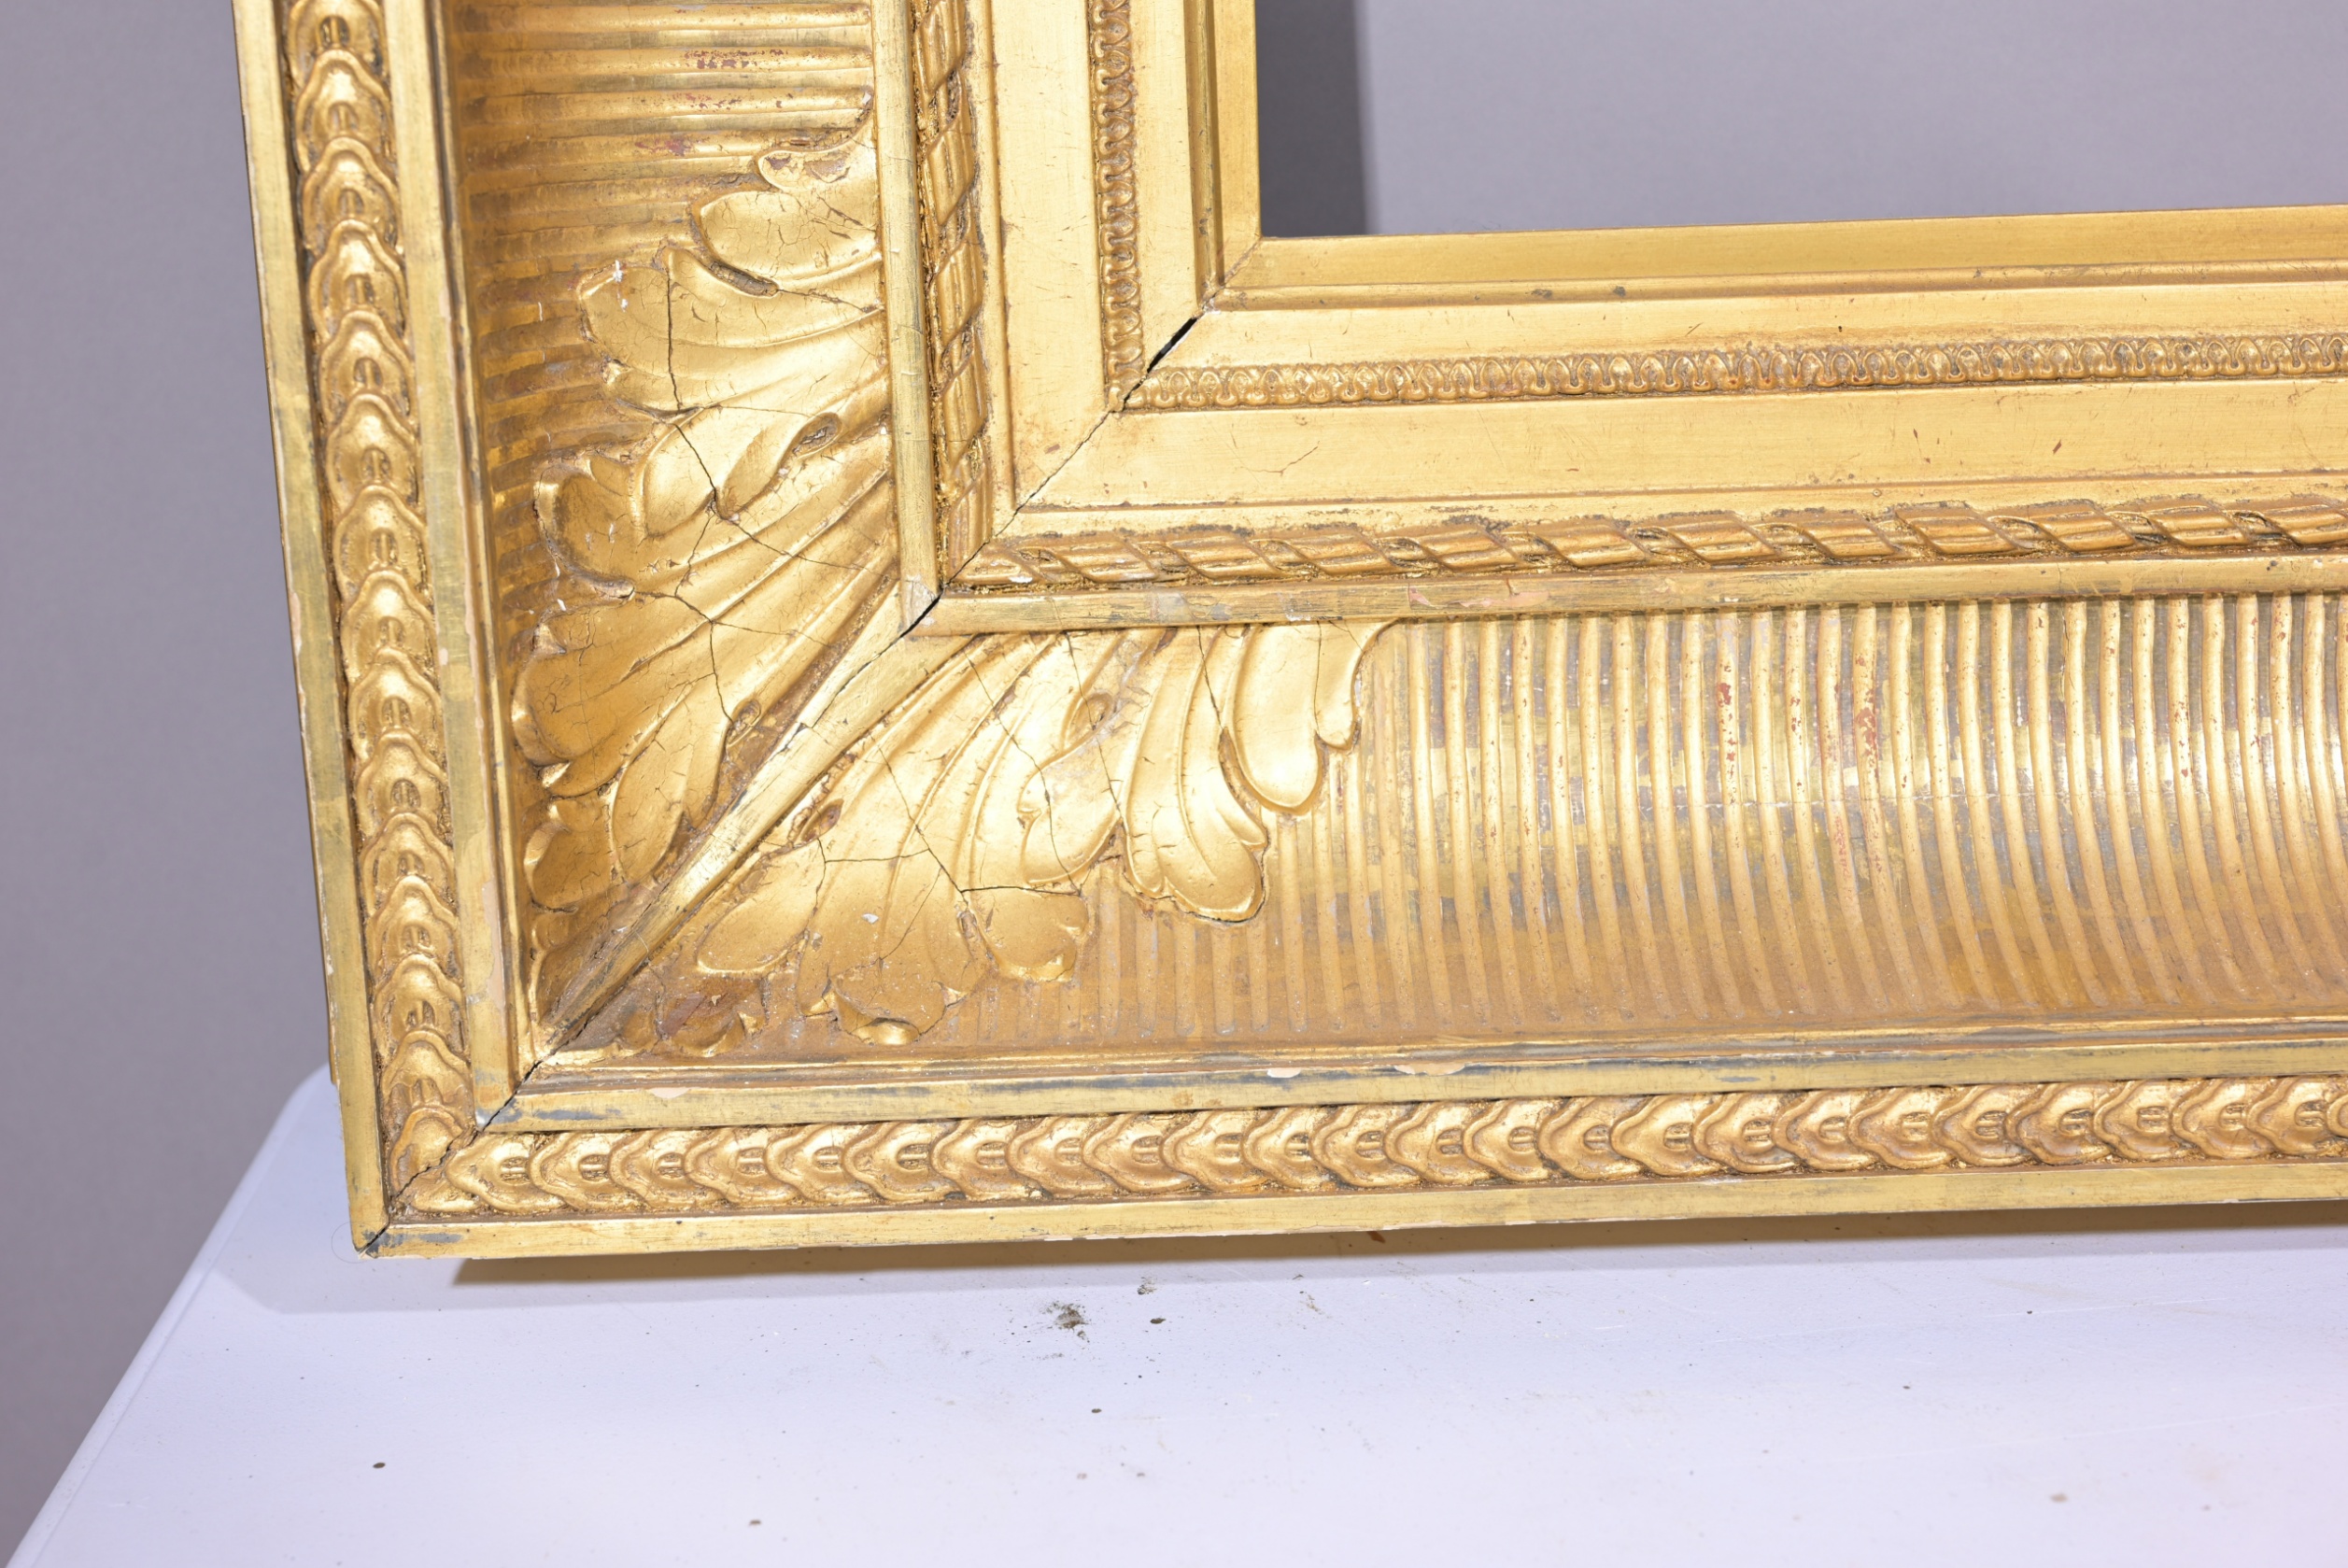 Large 19th C. French School Frame - 40 x 32.5 - Image 6 of 9